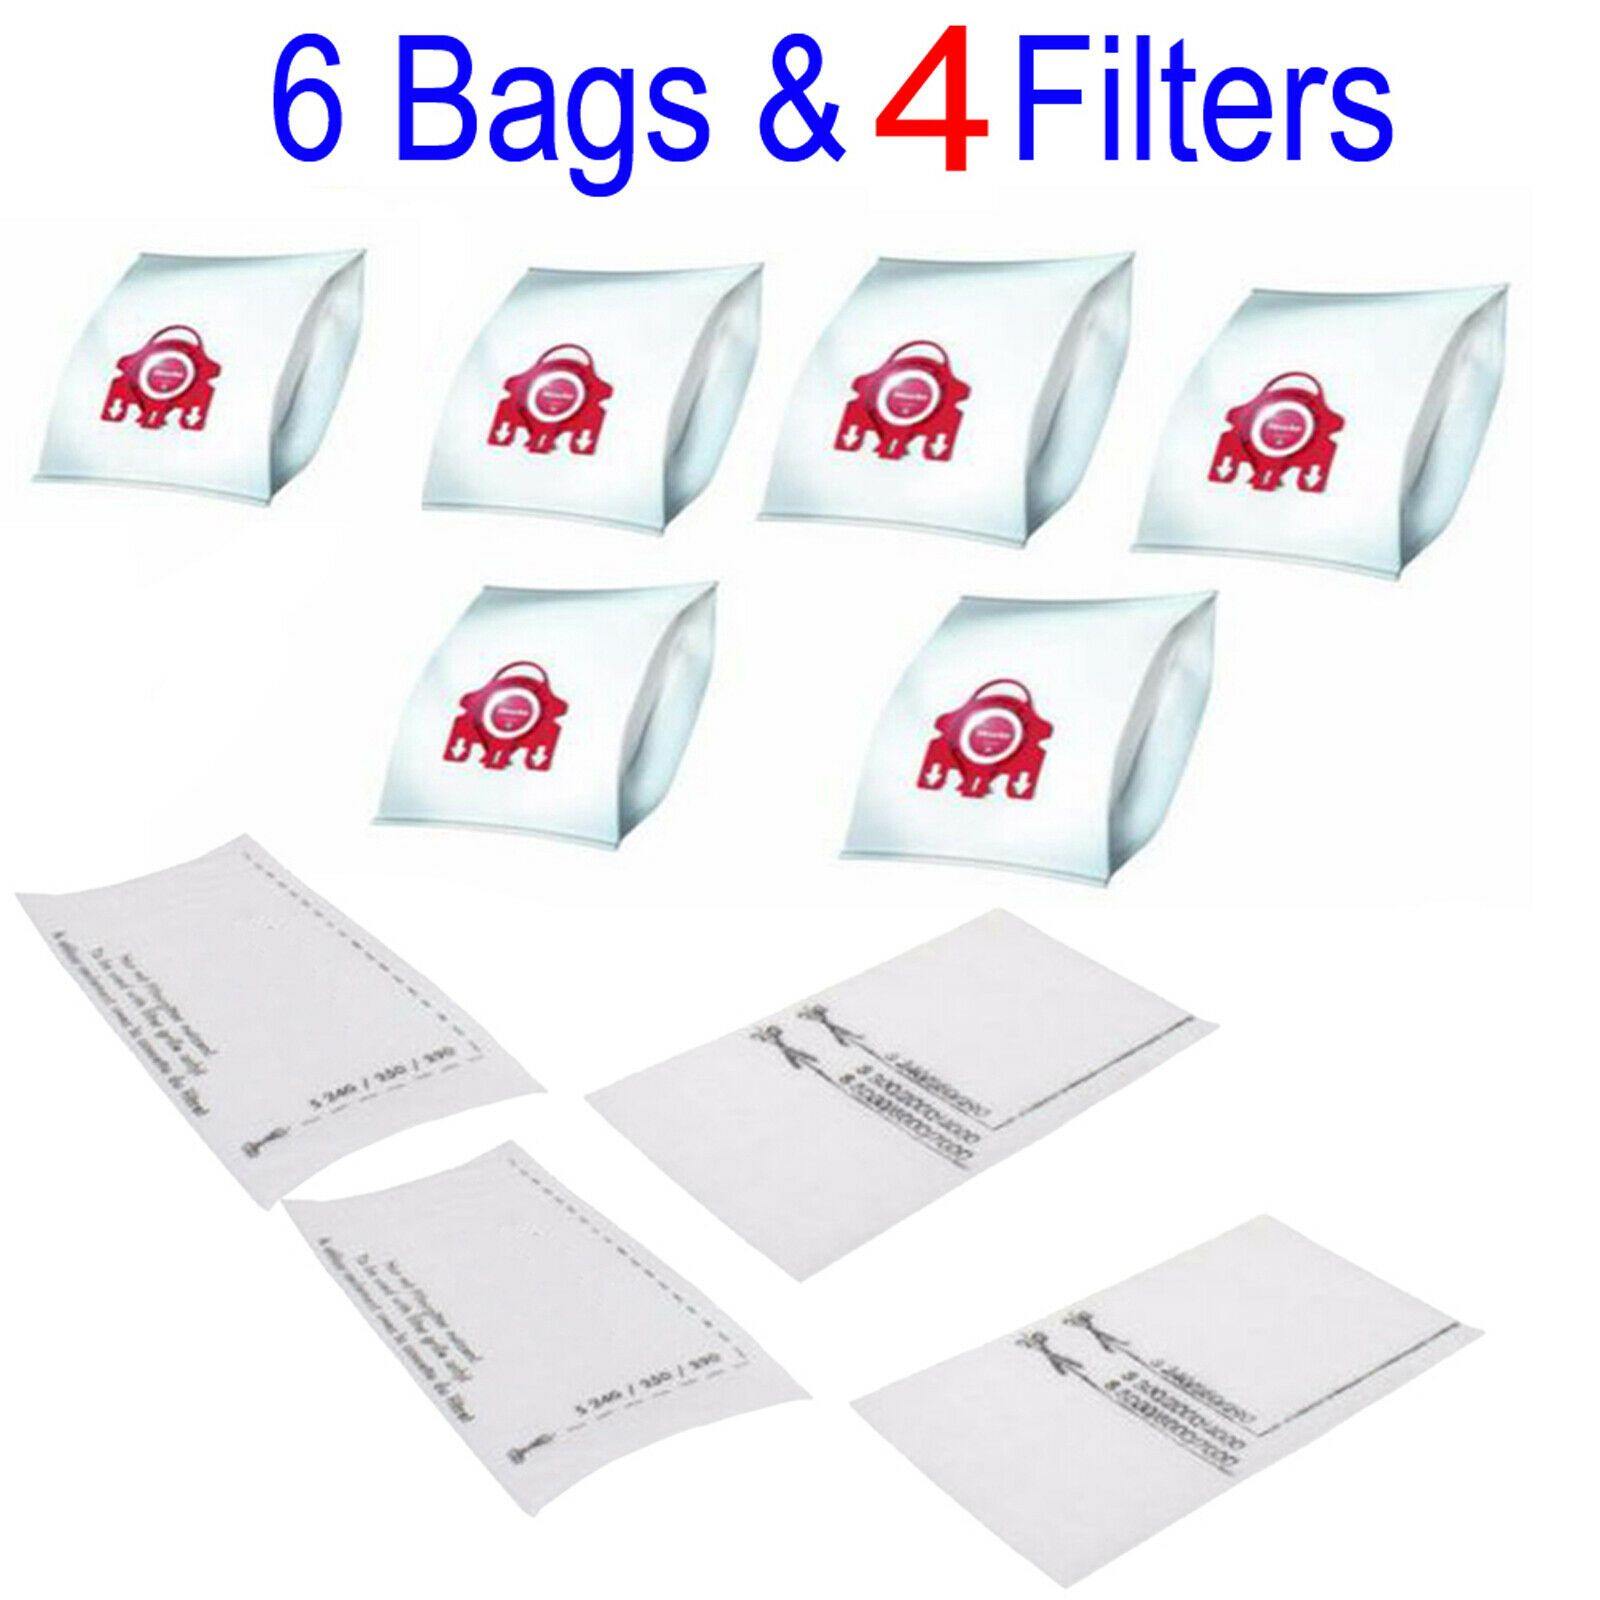 6 x Vacuum Cleaner Bags + 4 Filters For Hoover T2412 T2420 T2440 T2450 T2451 Sparesbarn